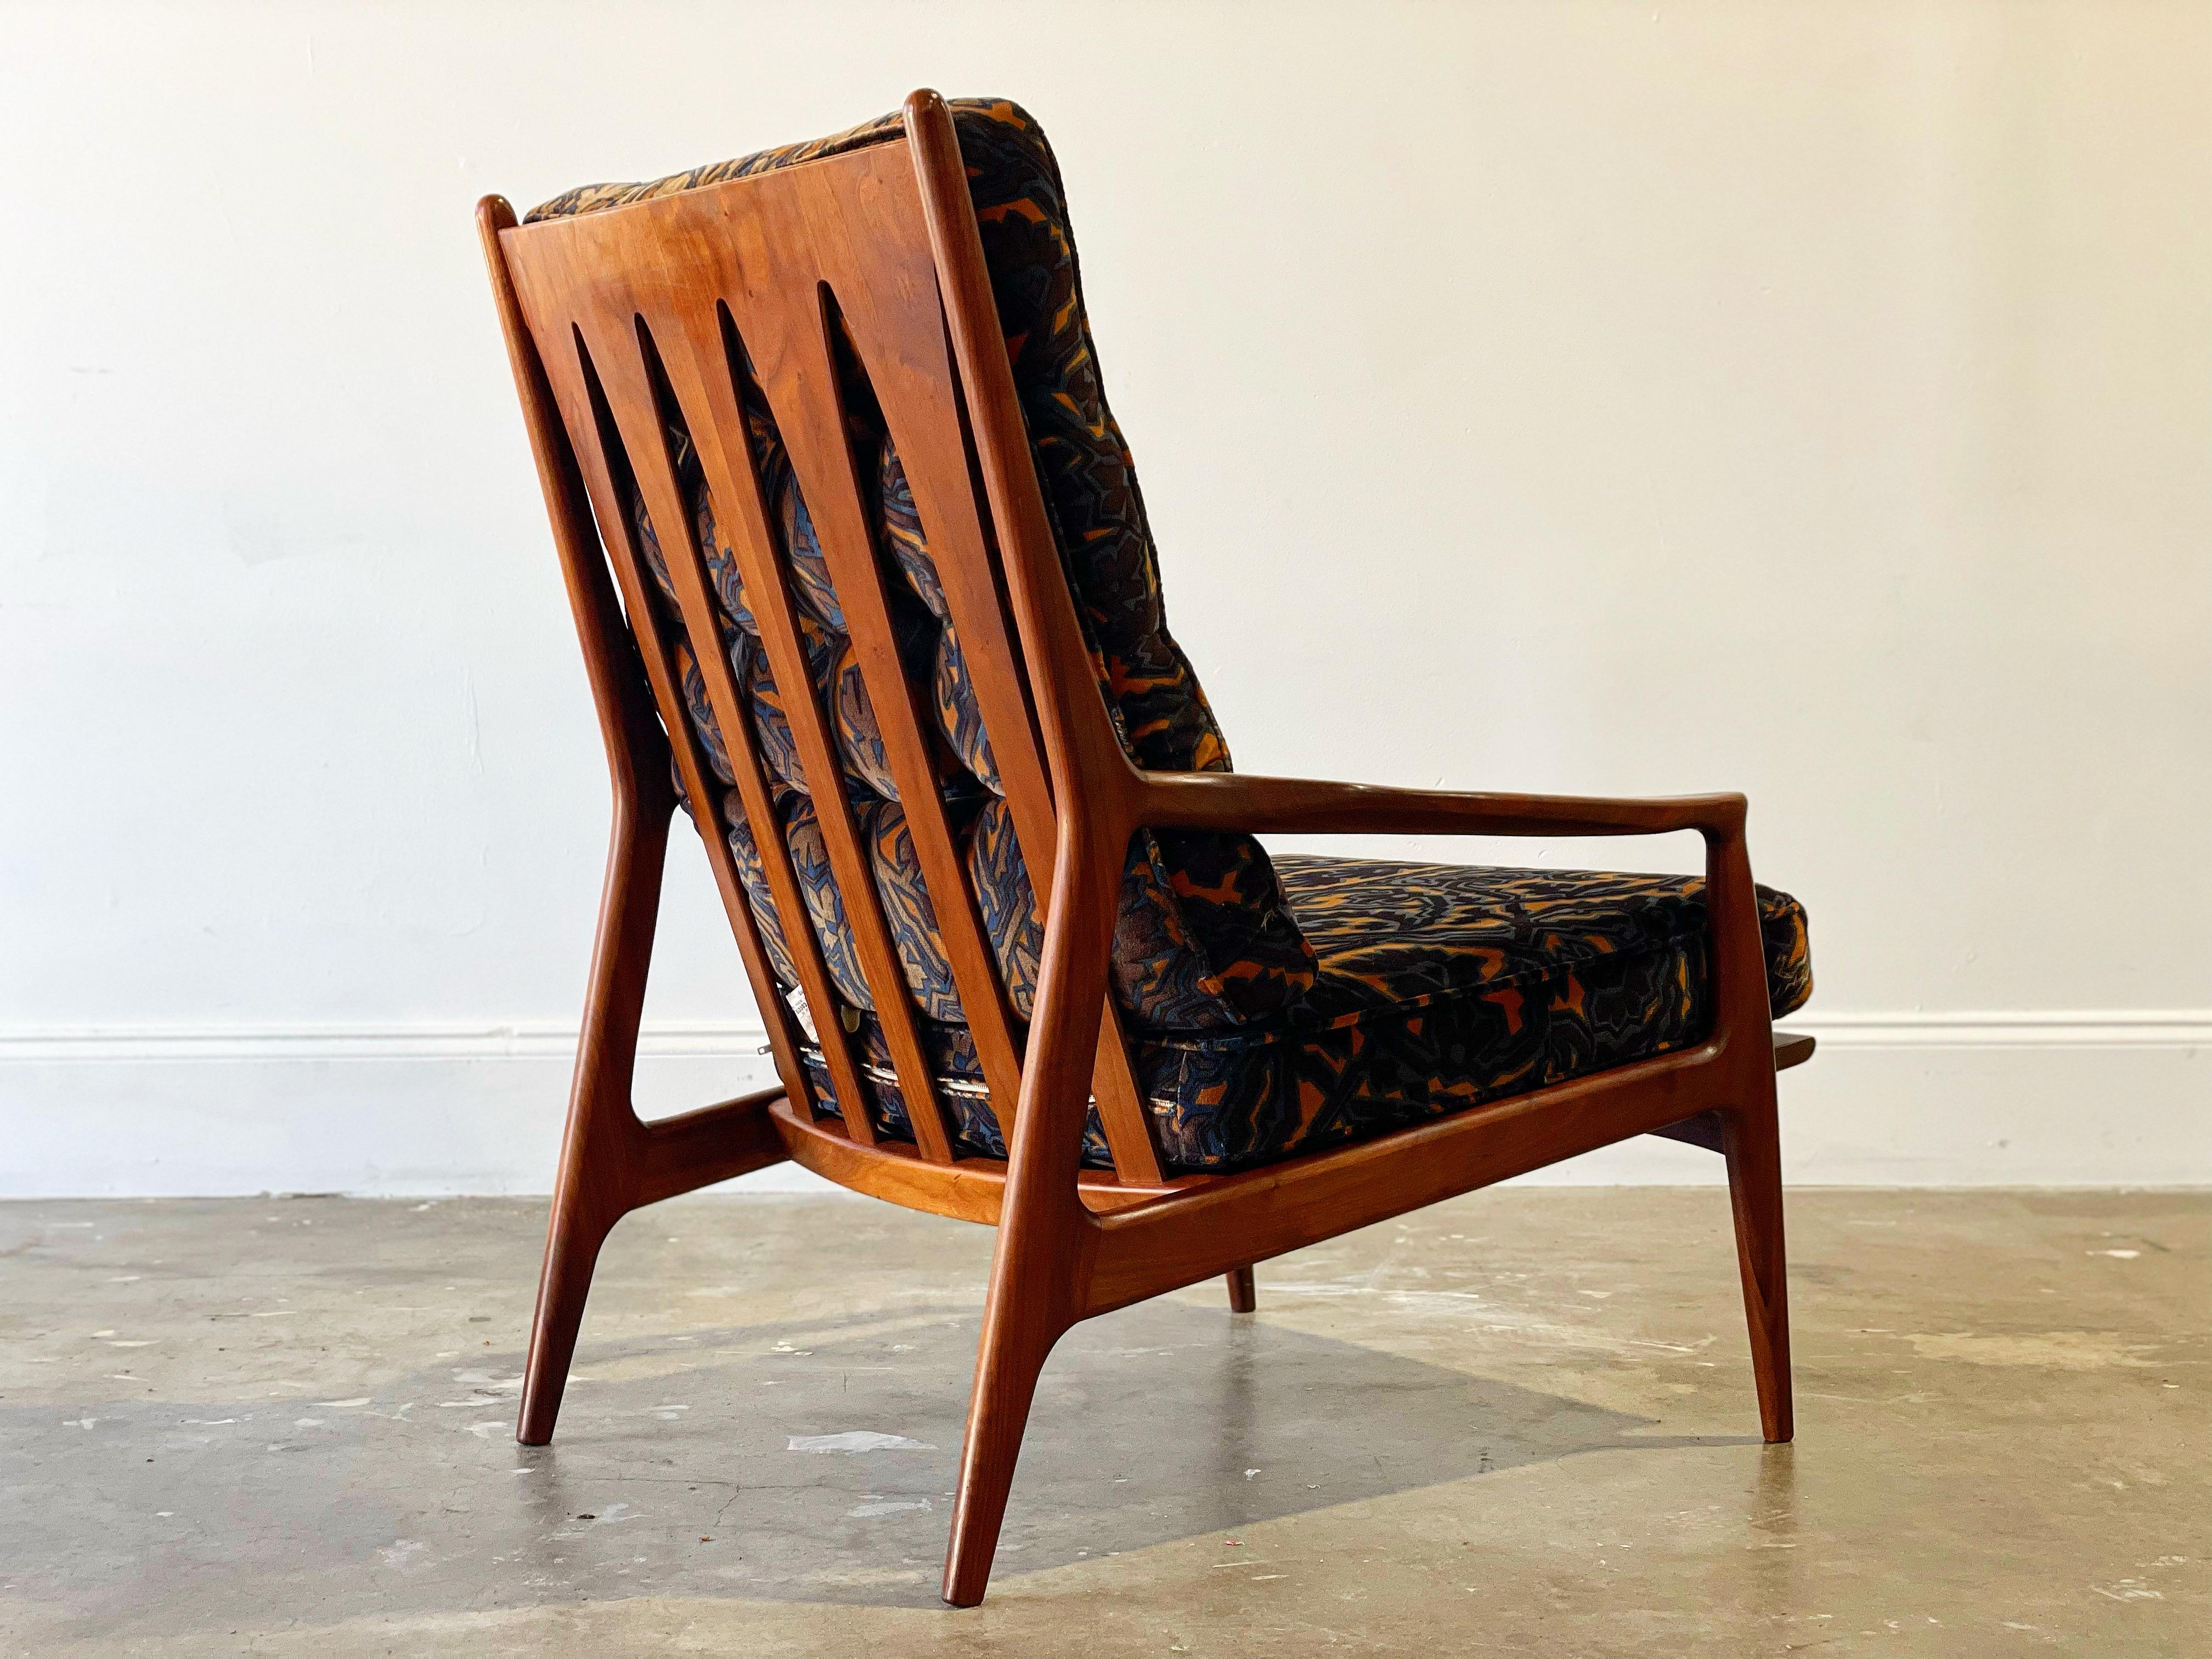 Milo Baughman + Jack Lenor Larsen - All Original - Unique on the Market
Archie high back lounge chair in sculpted solid American black walnut and all original Jack Lenor Larsen velvet. Truly a time capsule piece - this example has withstood the